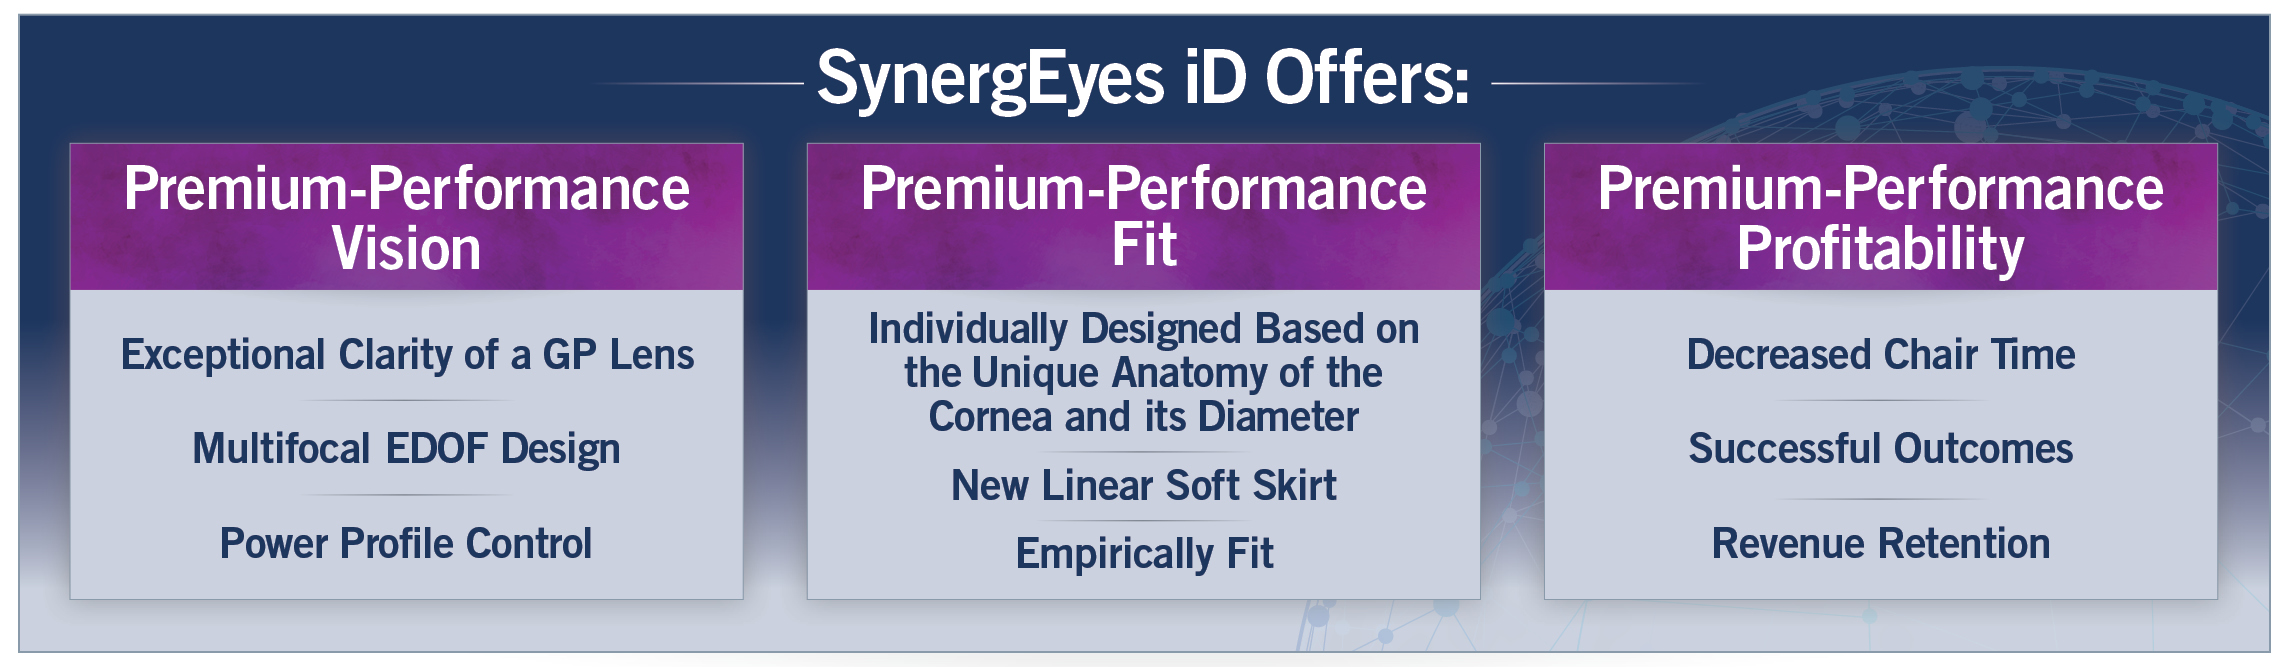 SynergEyes iD Offers Premium Performance Vision Fit Profit